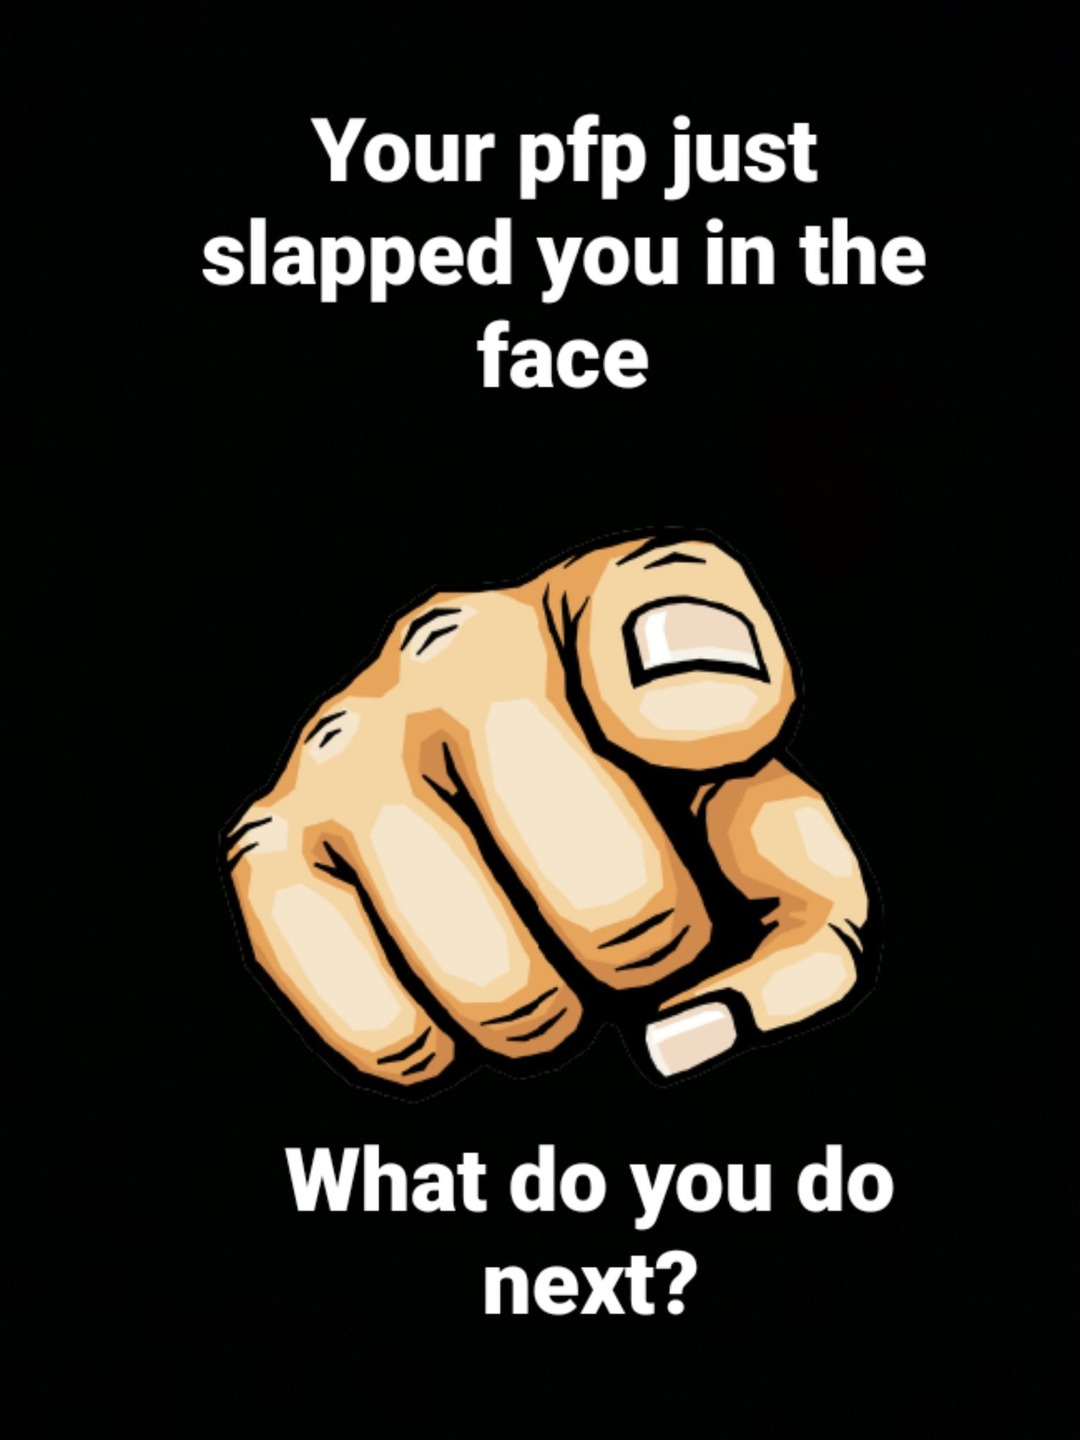 I'd prolly just die after the slap tbh... - meme